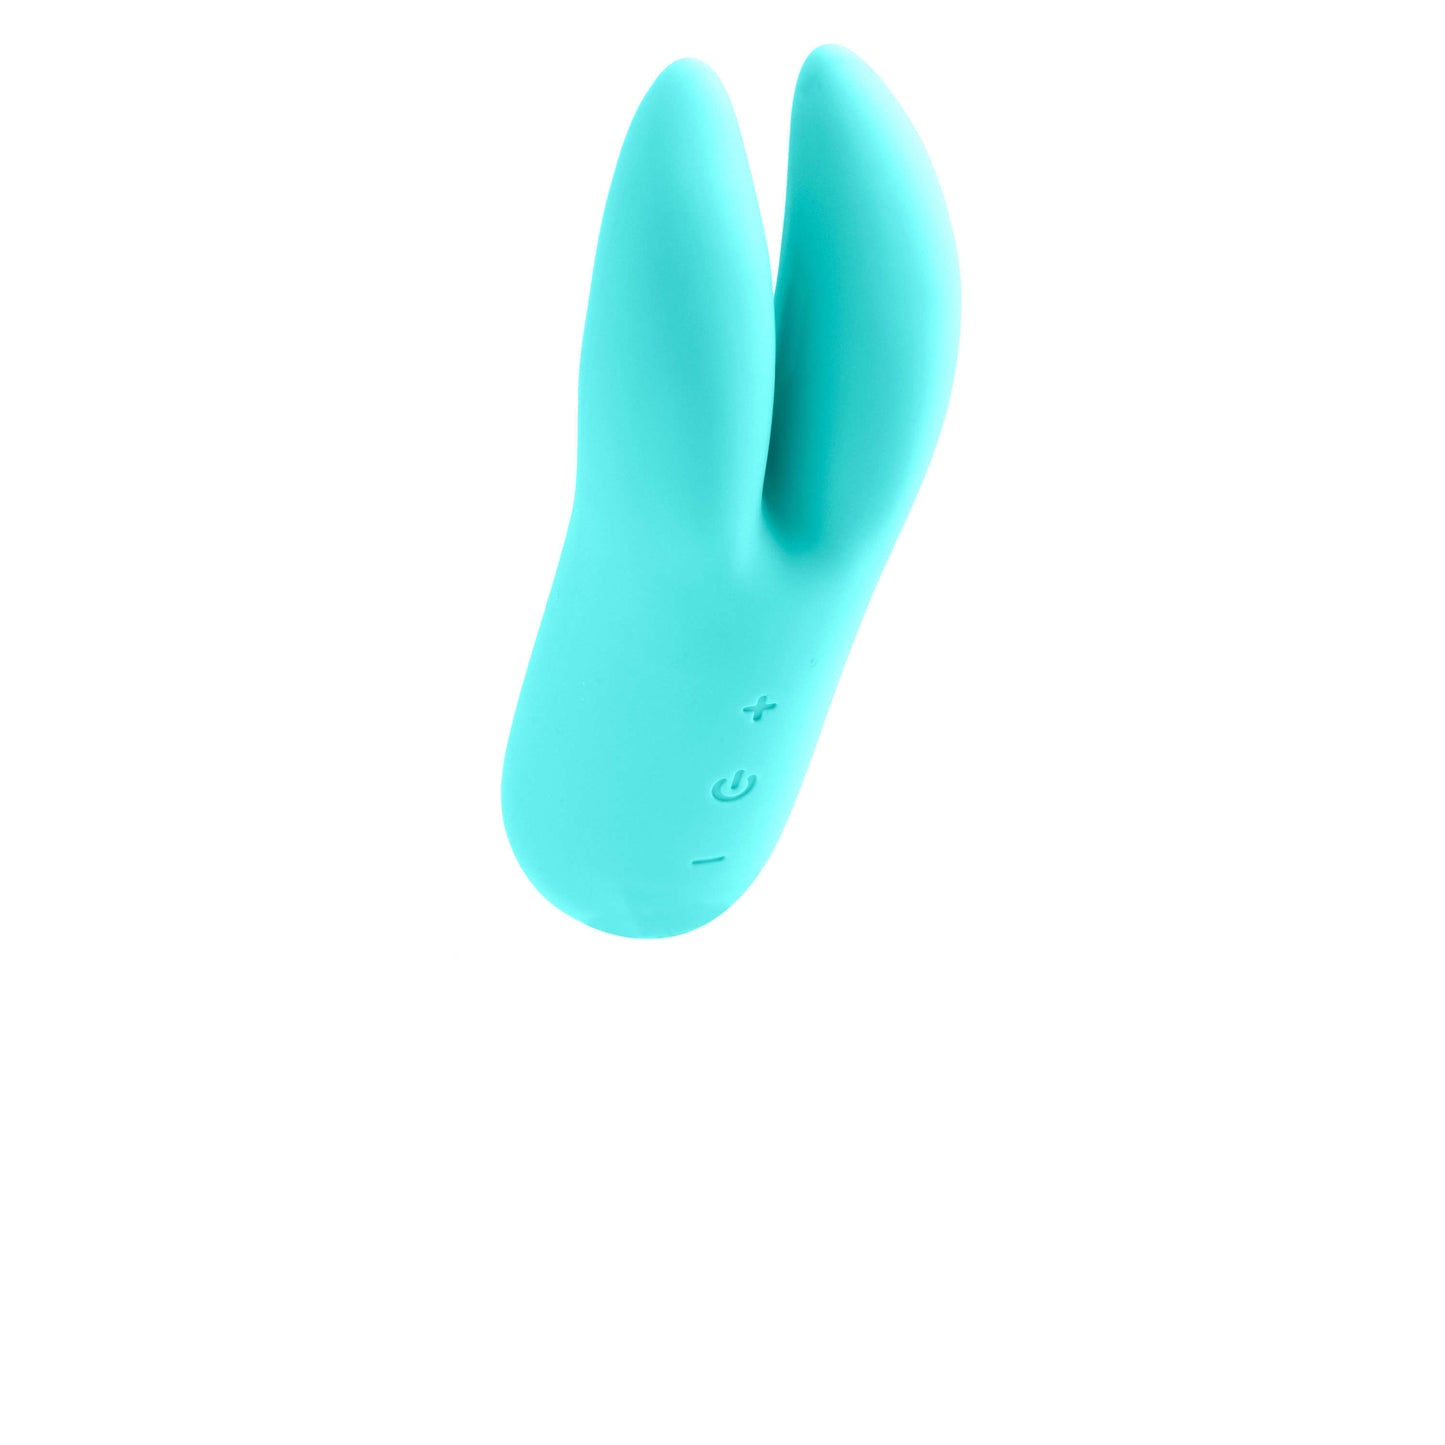 VeDO Kitti in turquoise - by The Bigger O - an online sex toy shop. We ship to USA, Canada and the UK.